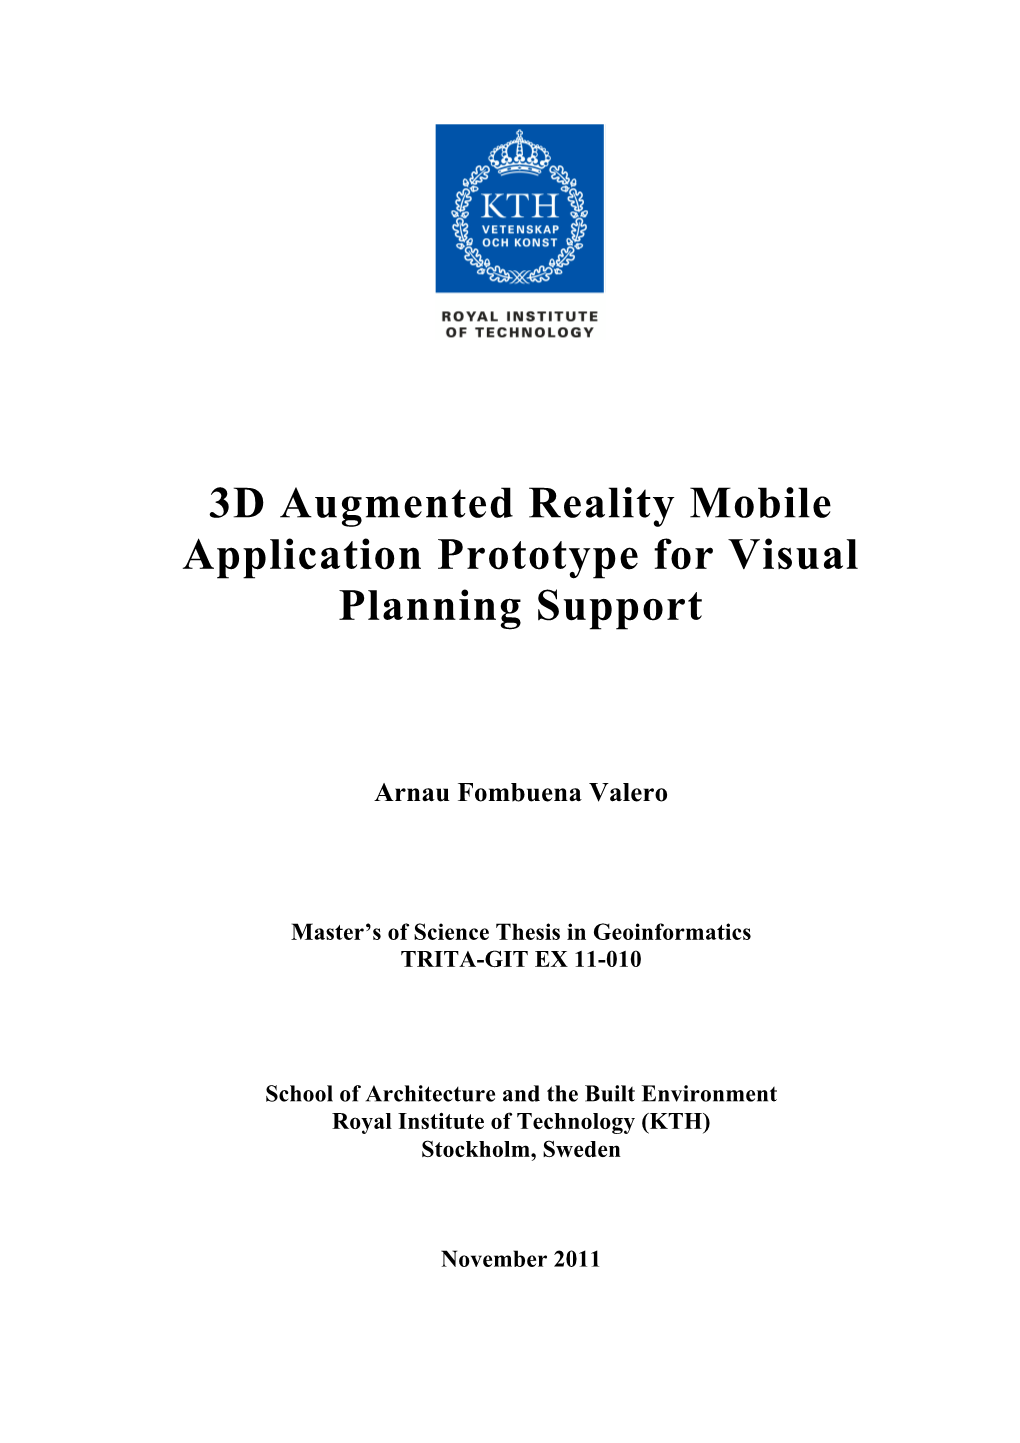 3D Augmented Reality Mobile Application Prototype for Visual Planning Support